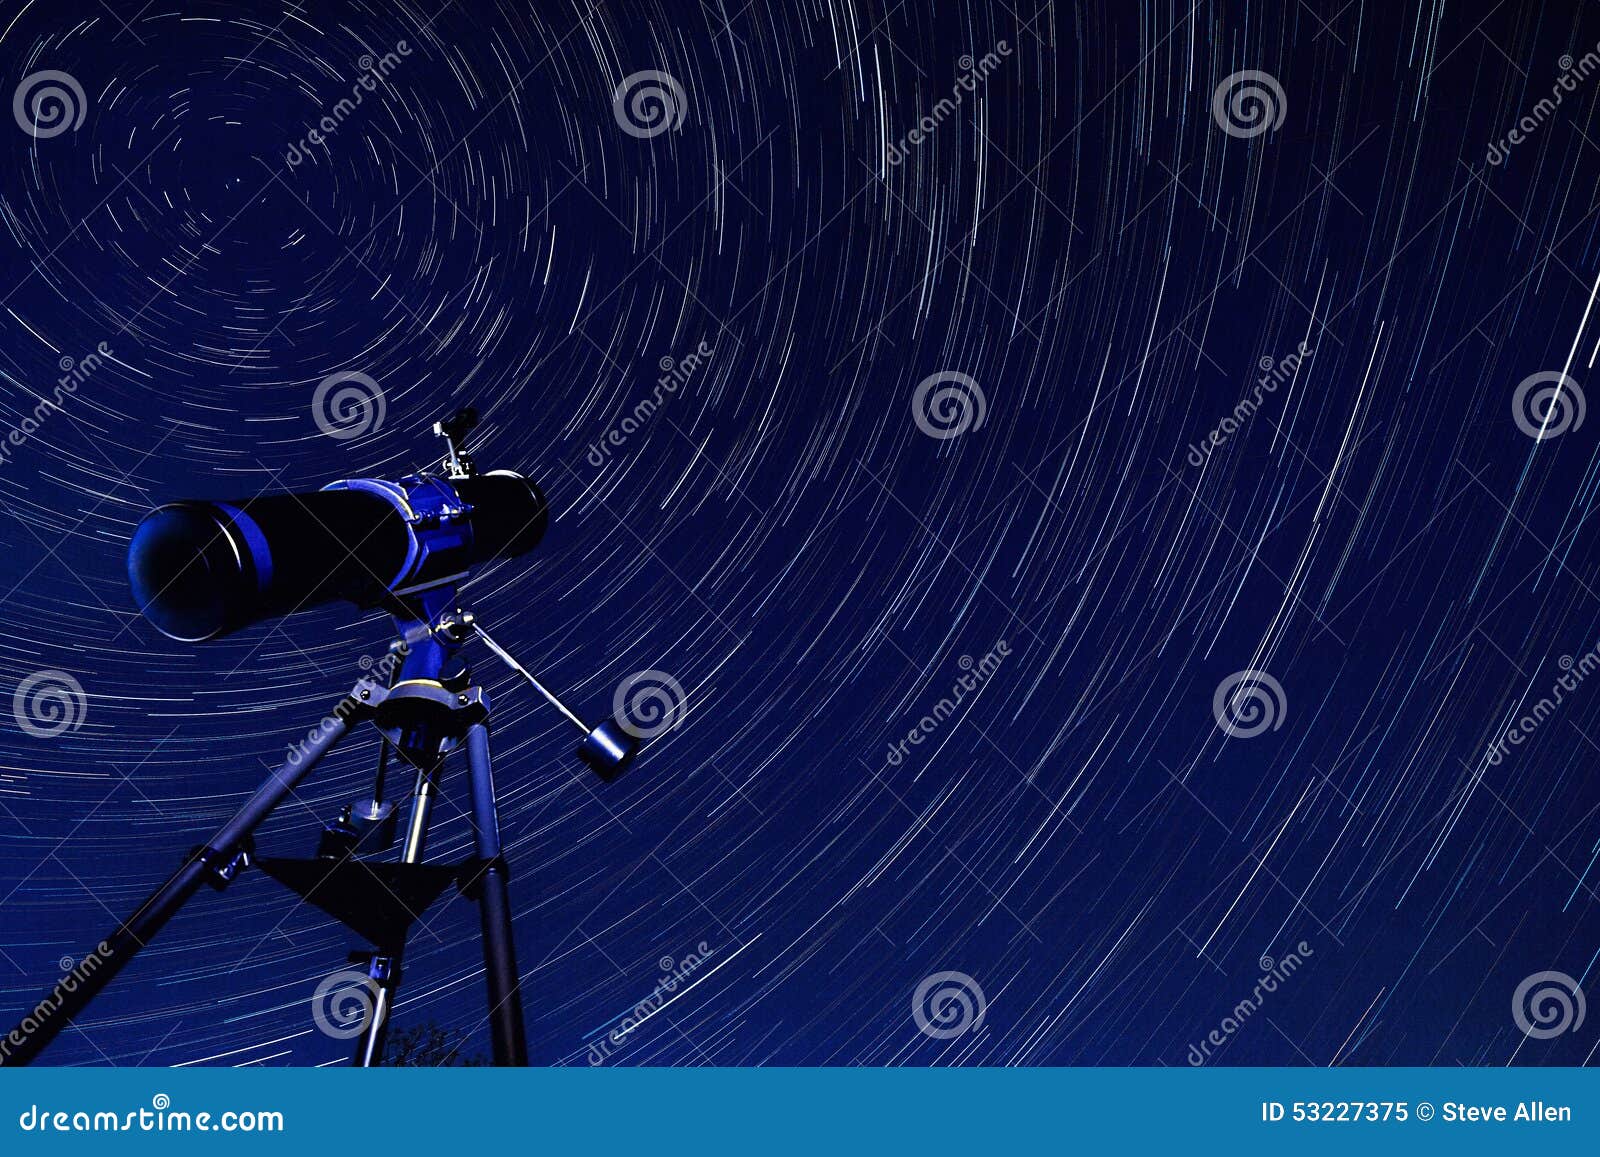 space - star trails - astronomy